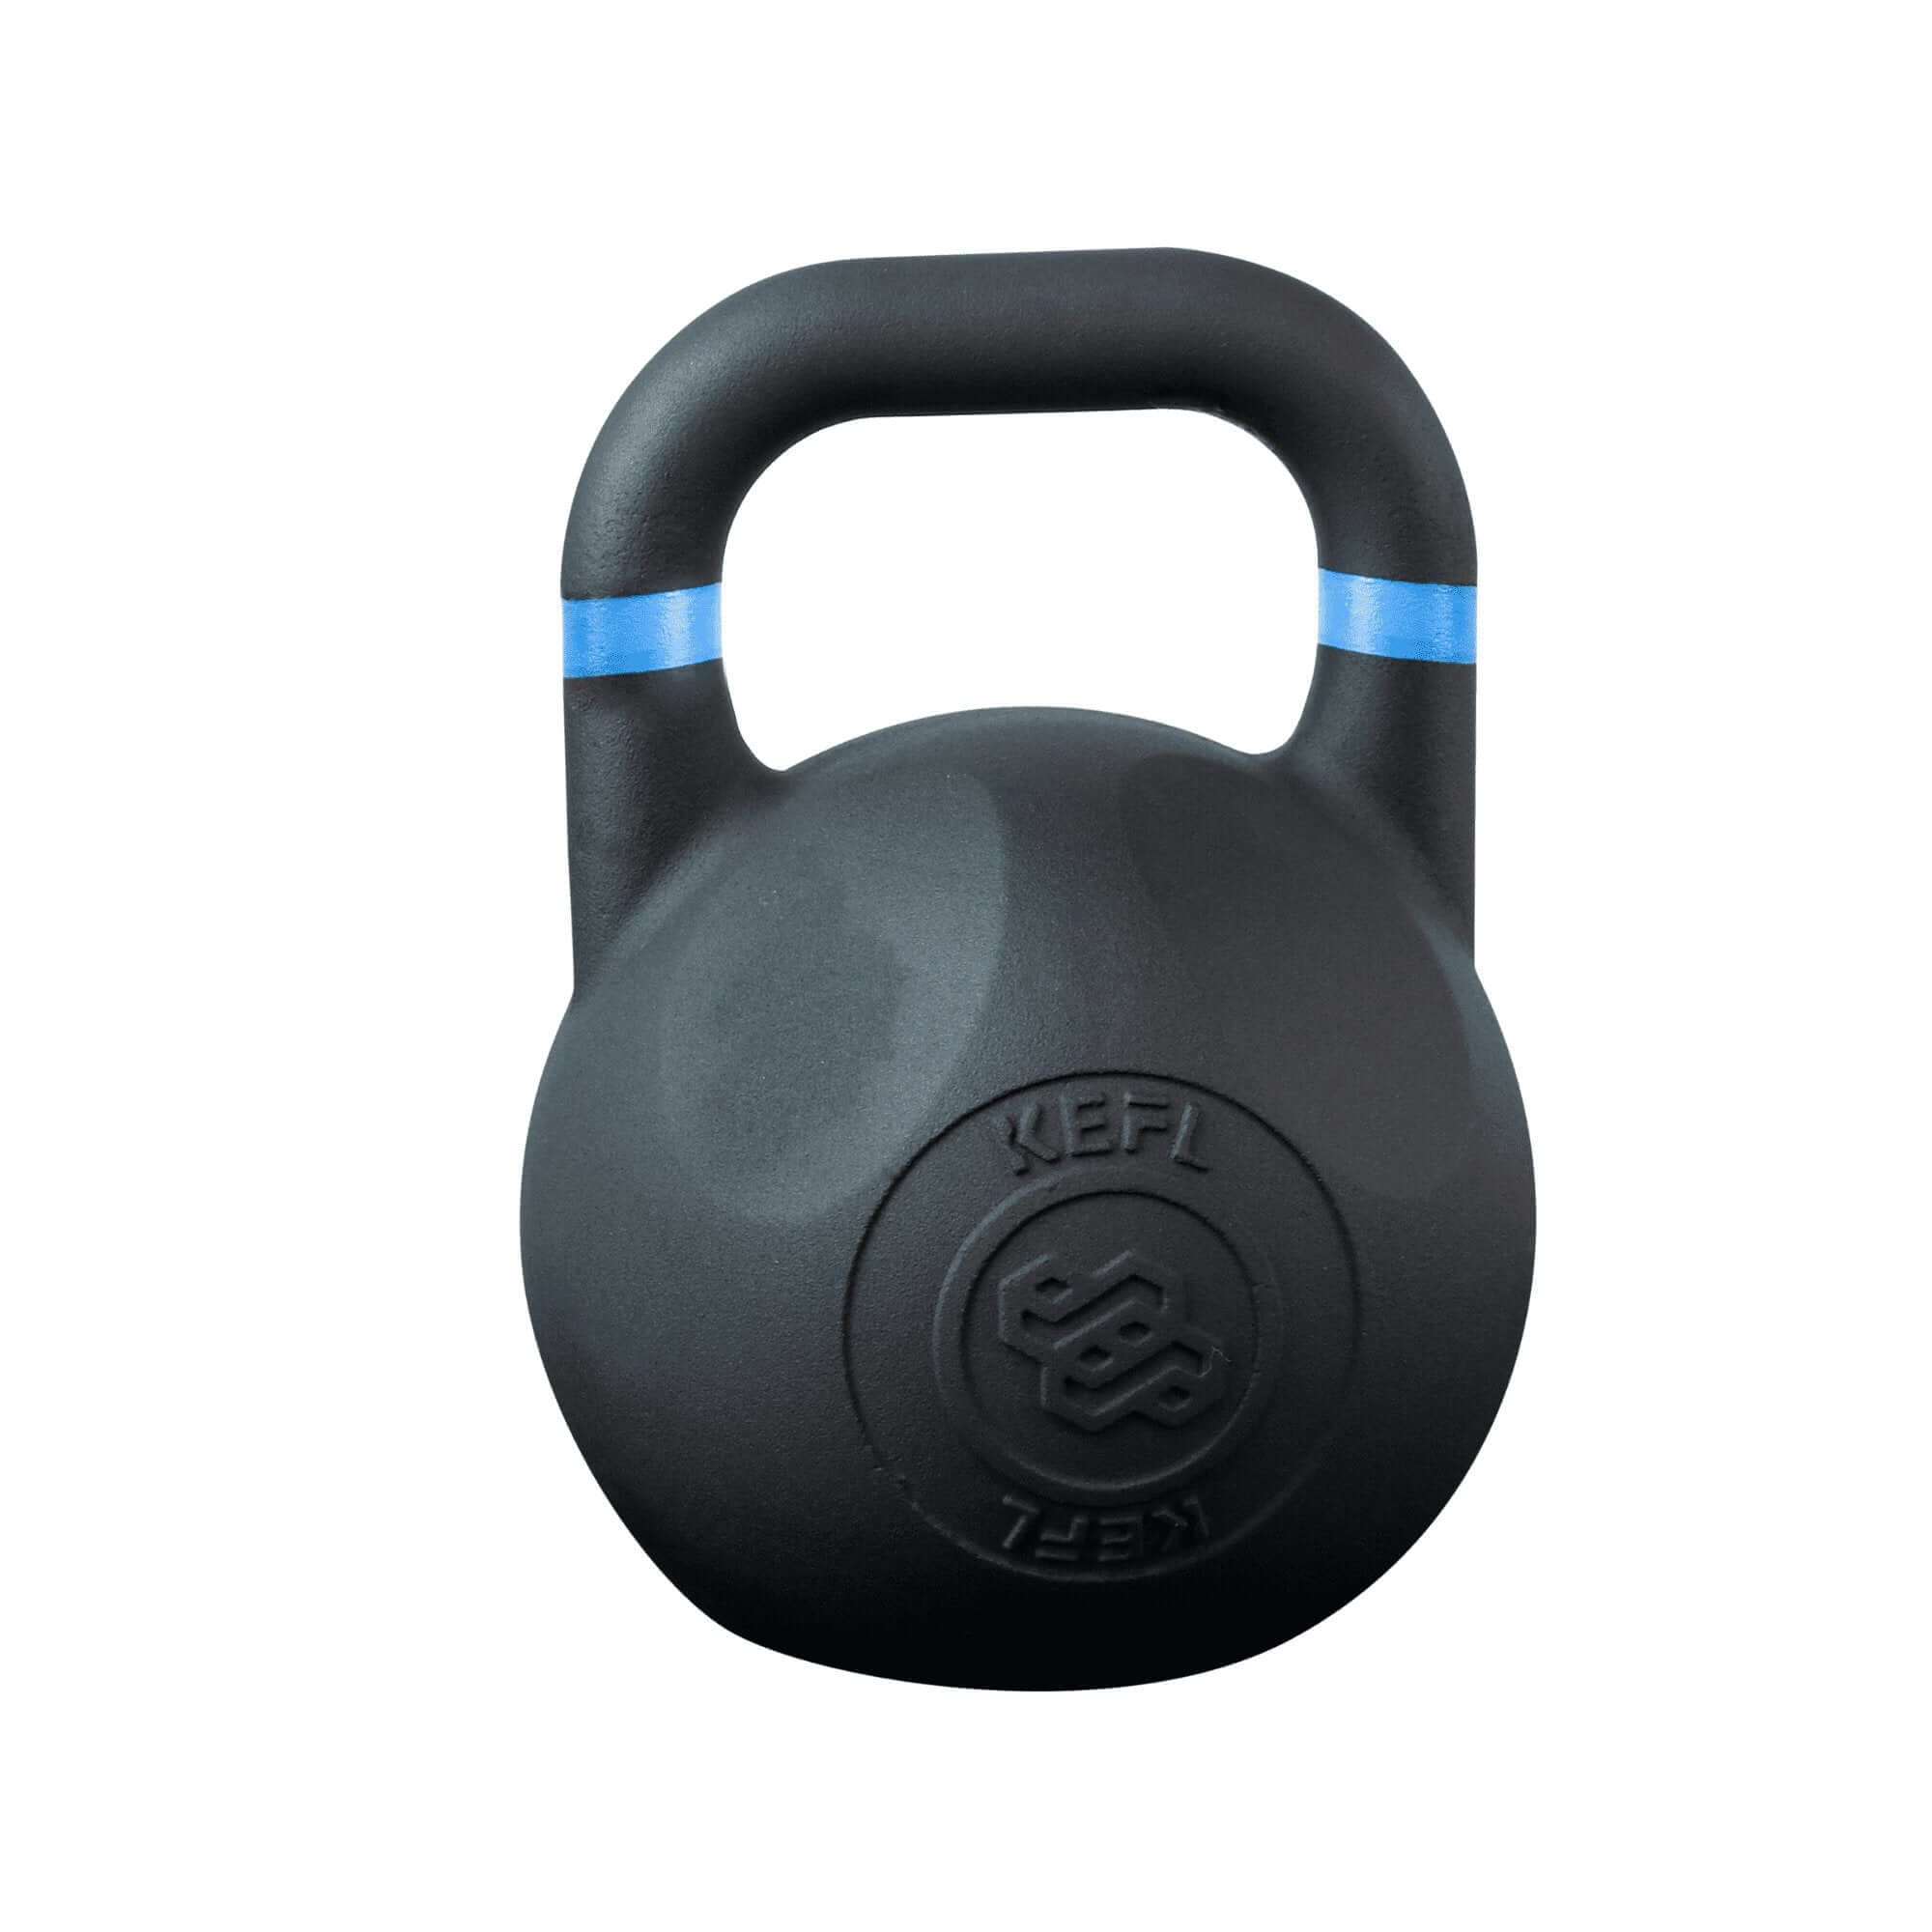 Competition Colour Coded Cast Iron Kettlebell - KEFLUK